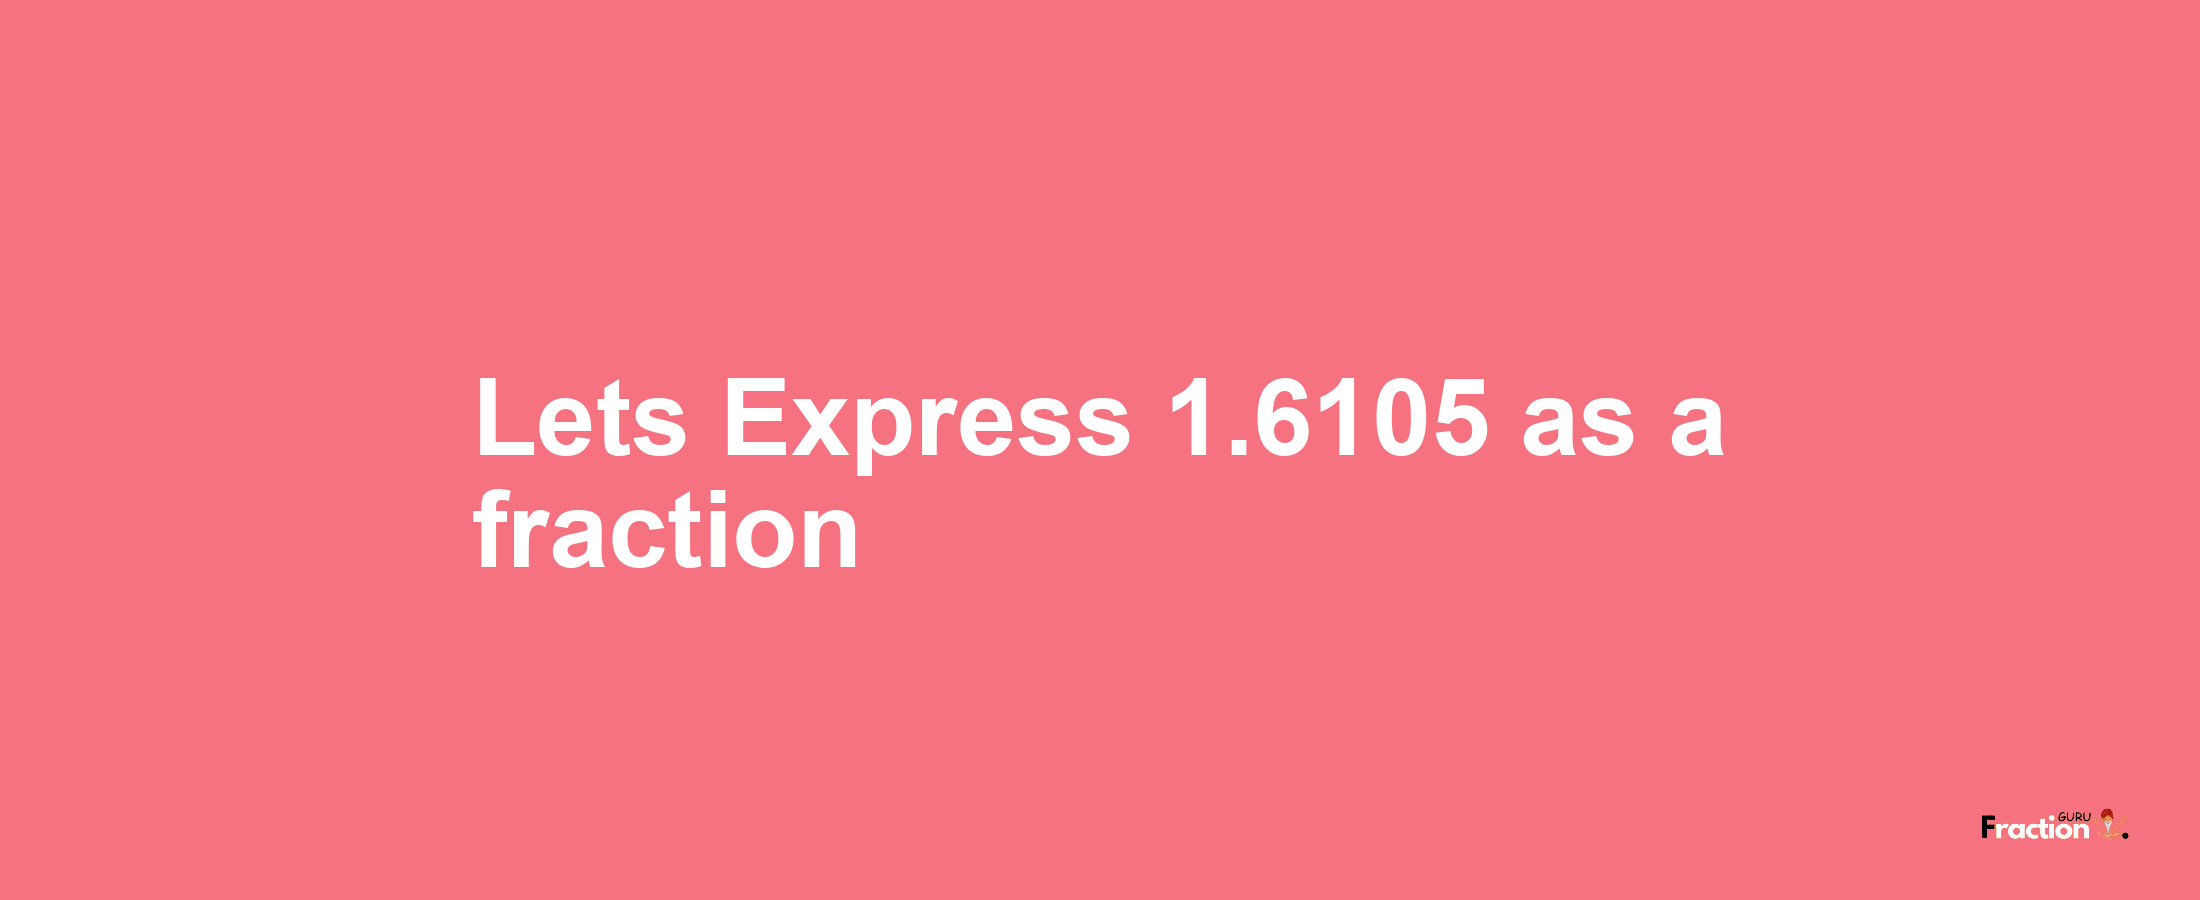 Lets Express 1.6105 as afraction